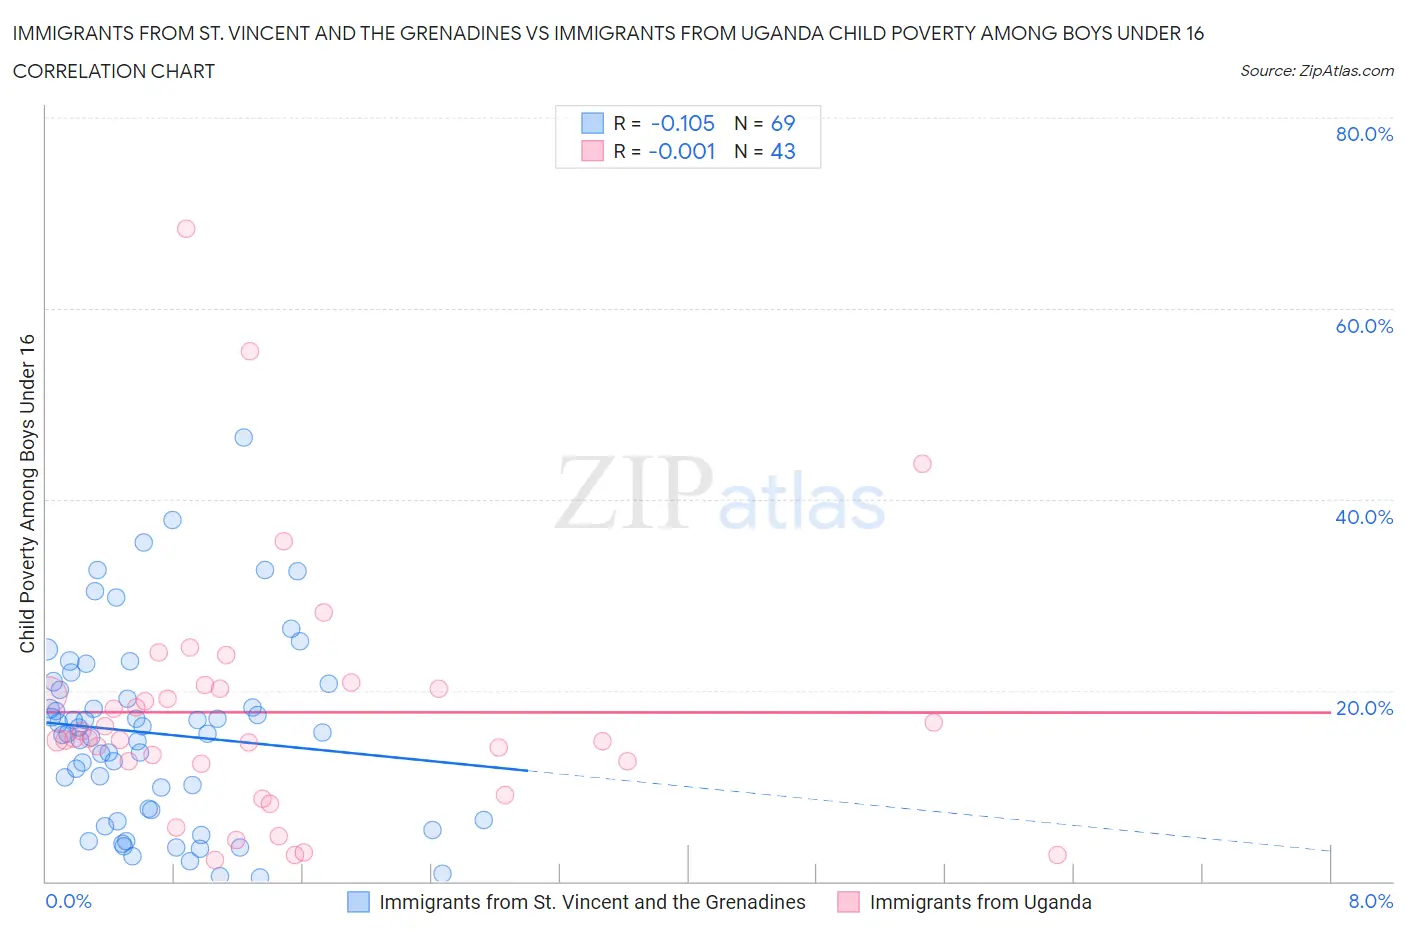 Immigrants from St. Vincent and the Grenadines vs Immigrants from Uganda Child Poverty Among Boys Under 16